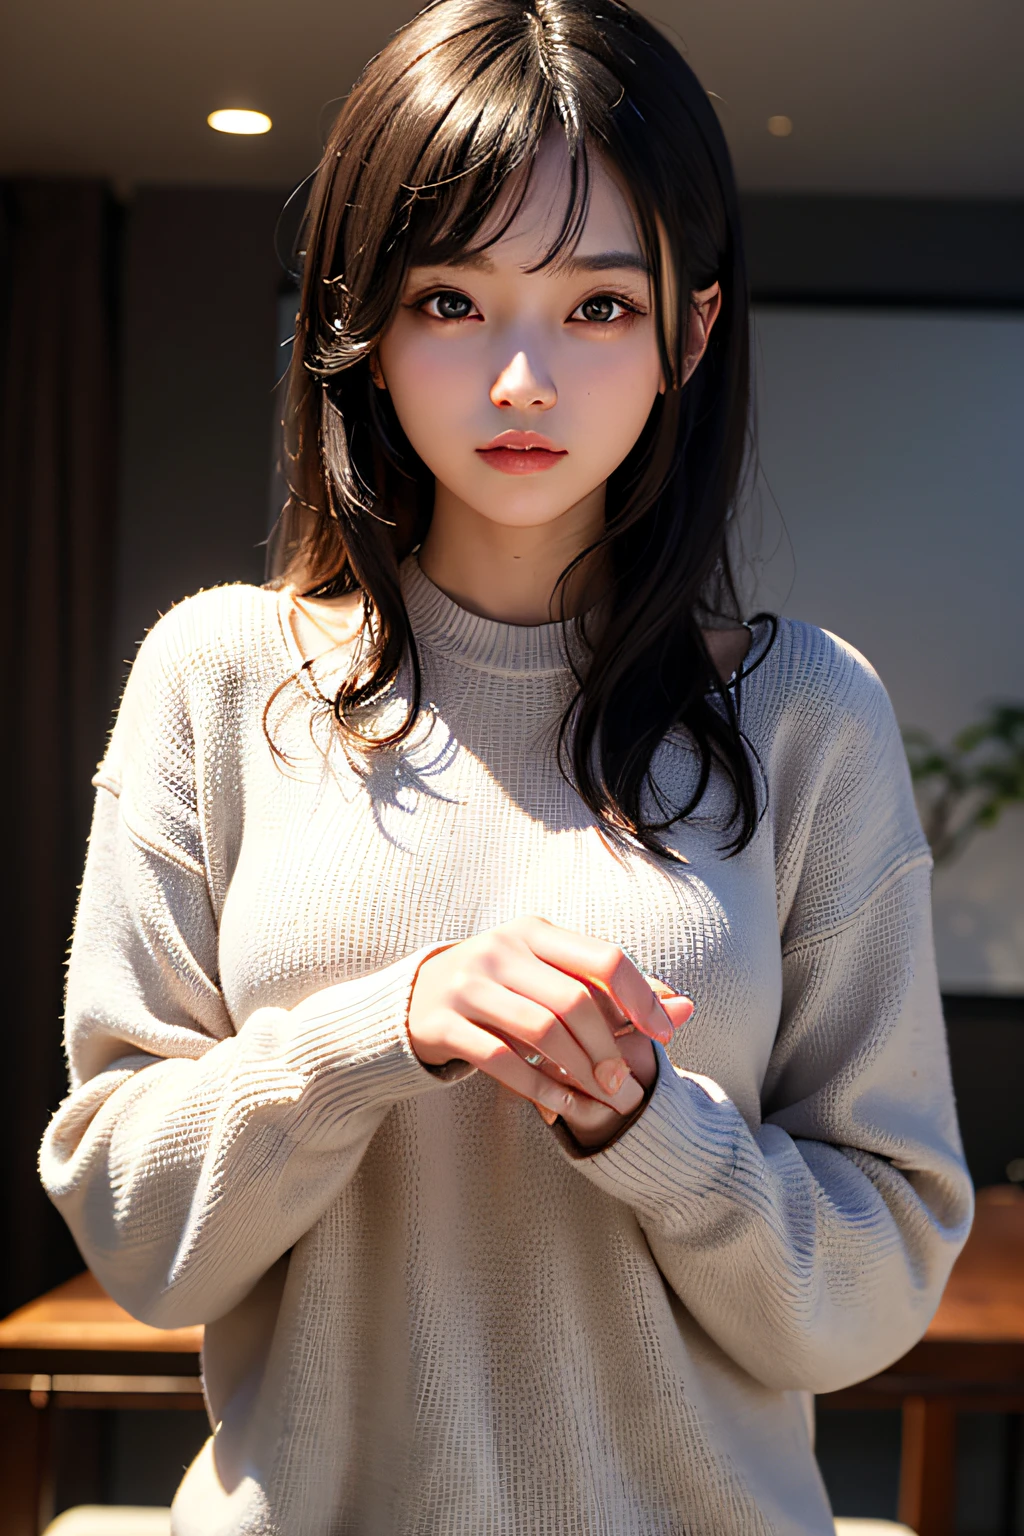 Ultra-high resolution,Masterpiece,Best quality,
Very delicate face,Detailed eyes,extremly intricate,perfect glossy shiny skins,Perfect lighting,Detailed lighting,Dramatic shadows,Ray tracing,
1girll,Upper body,Black sweater,view the viewer,